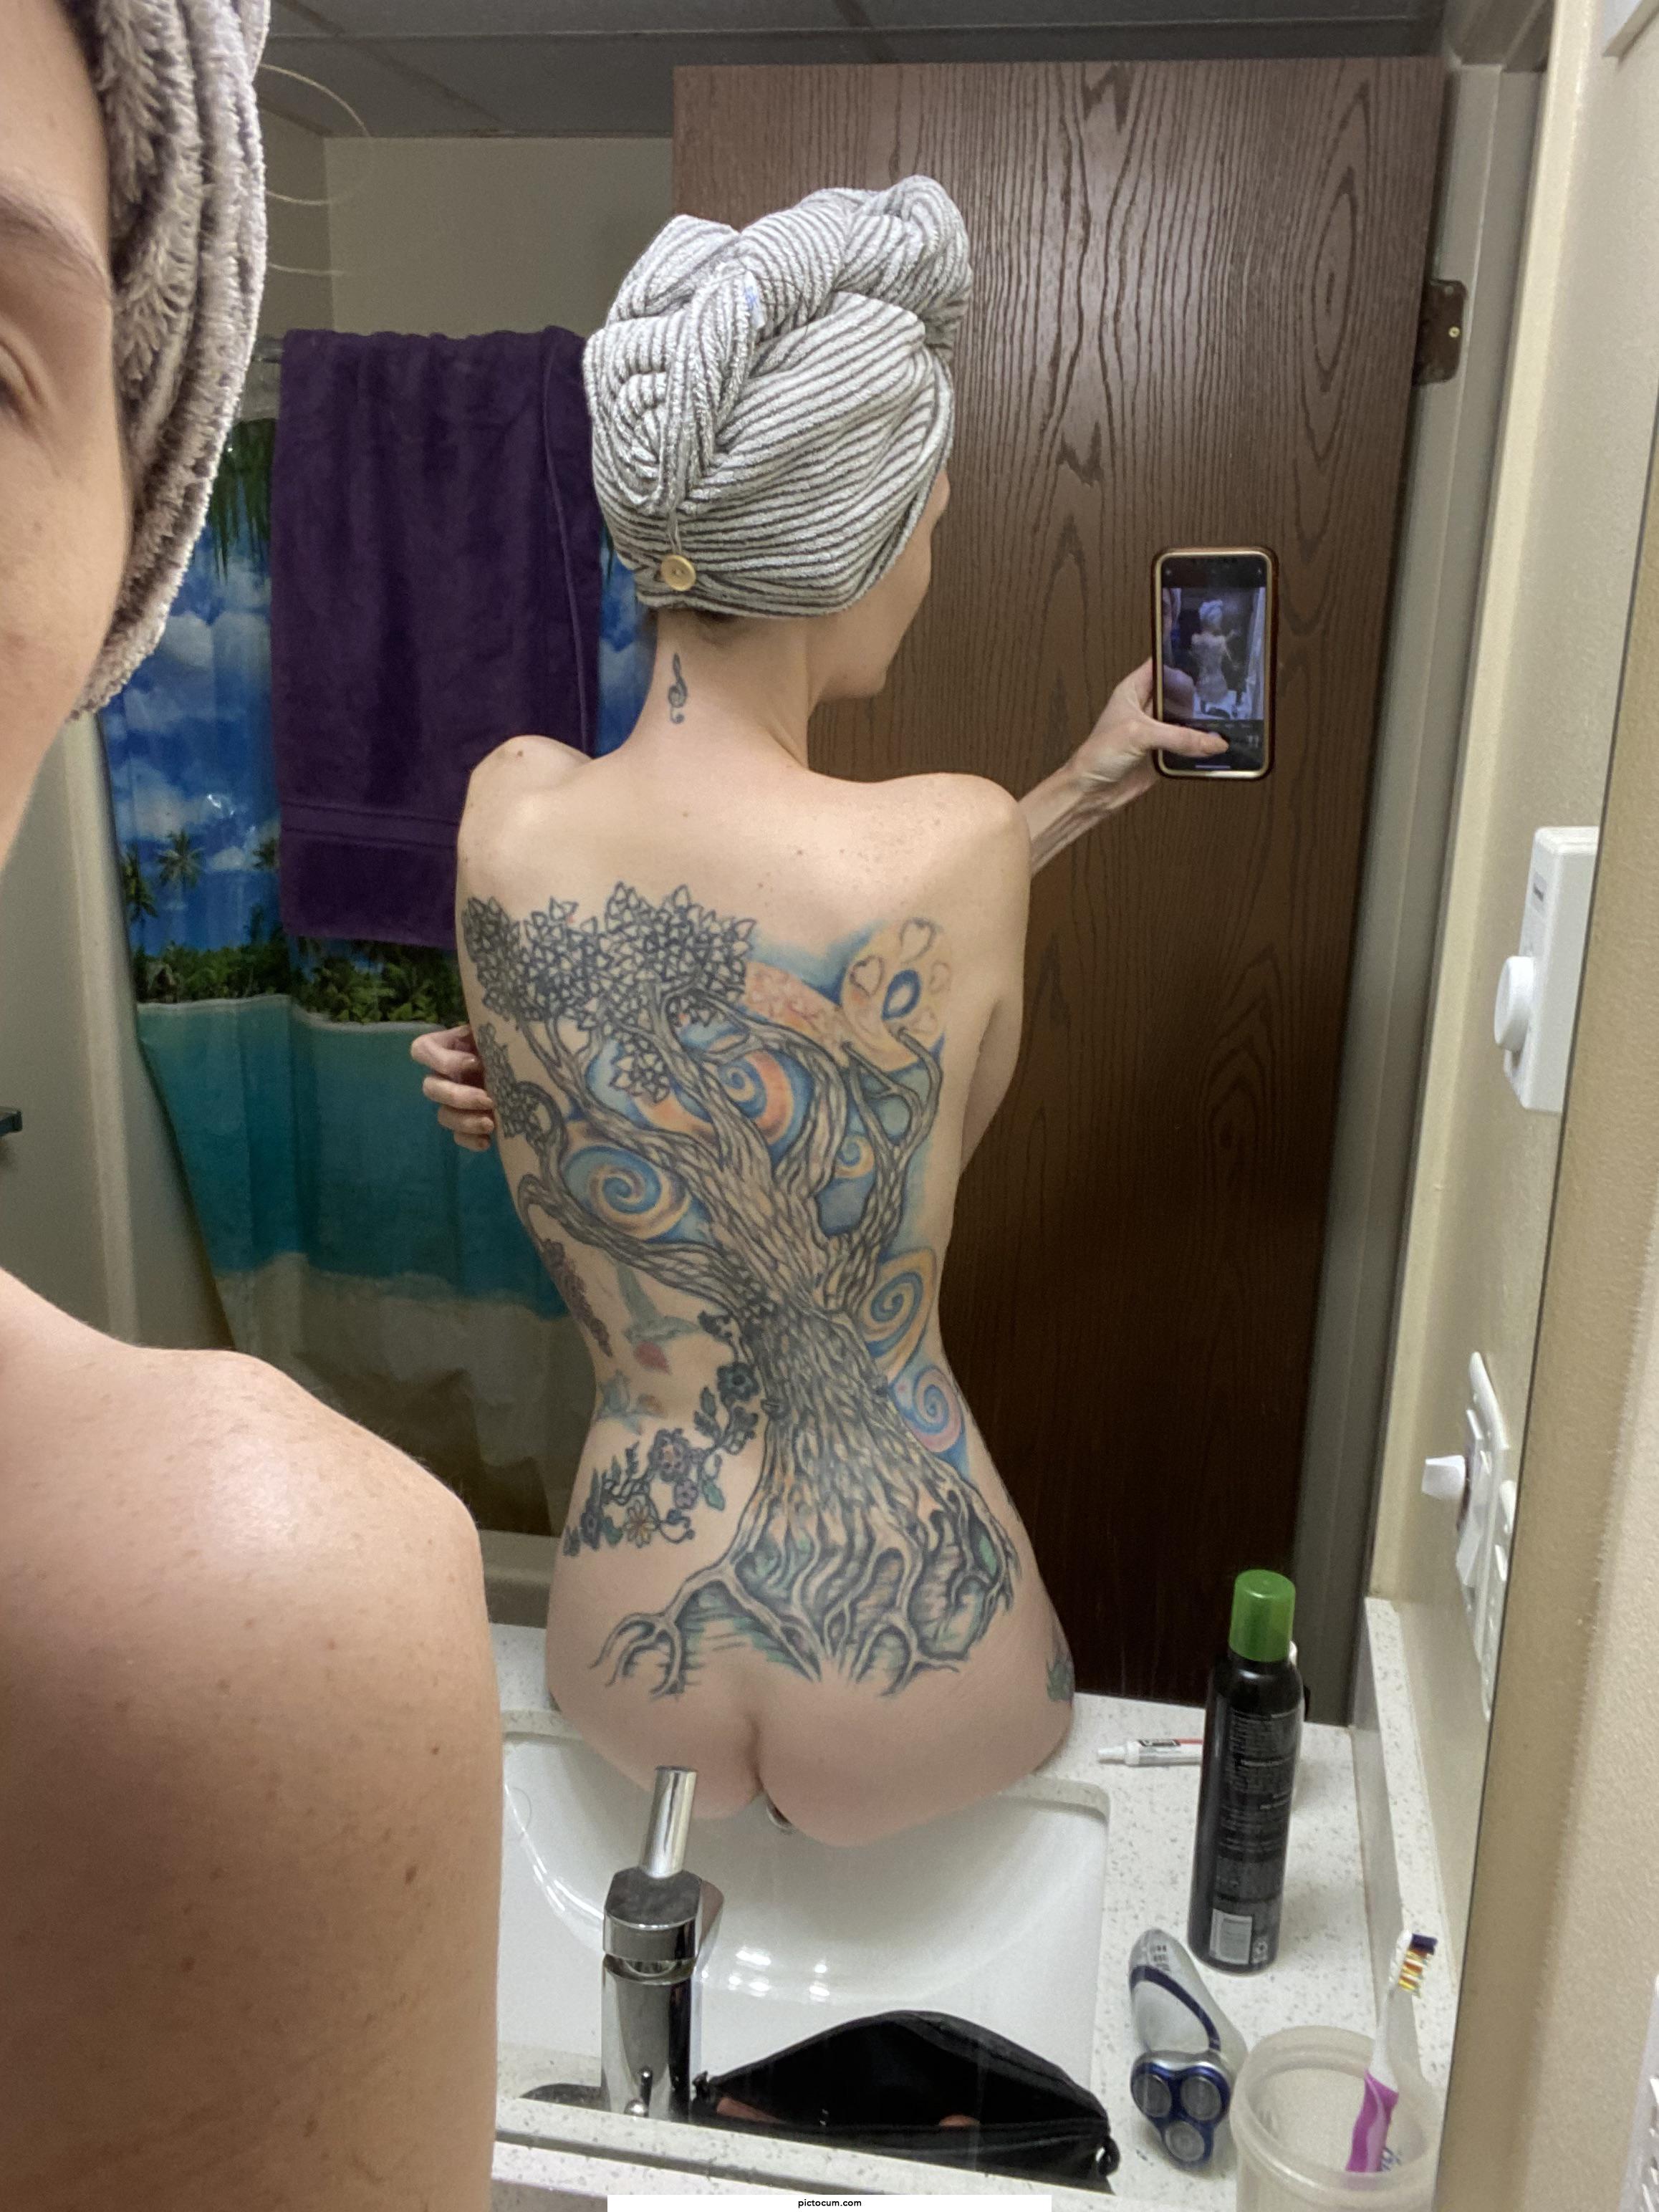 Tattoos and towel wraps